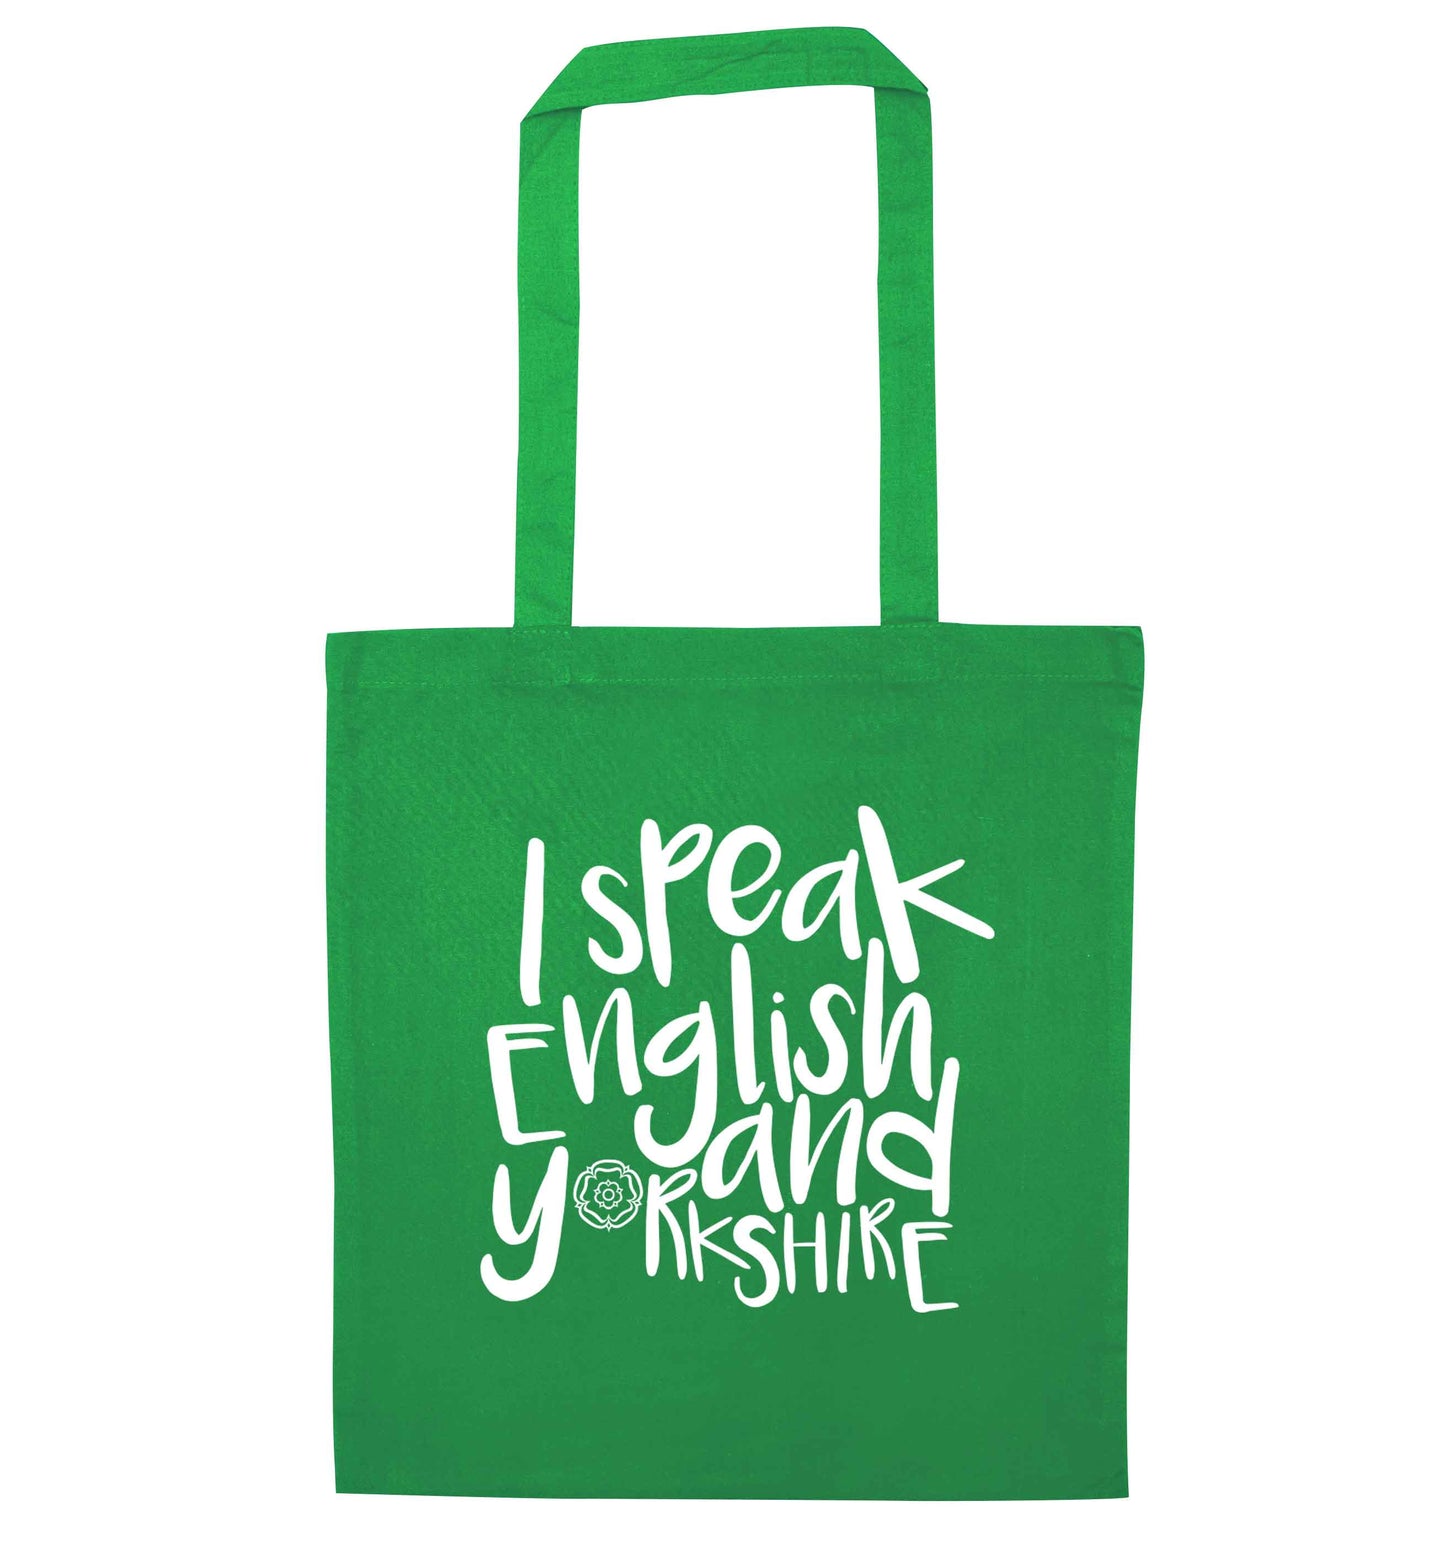 I speak English and Yorkshire green tote bag